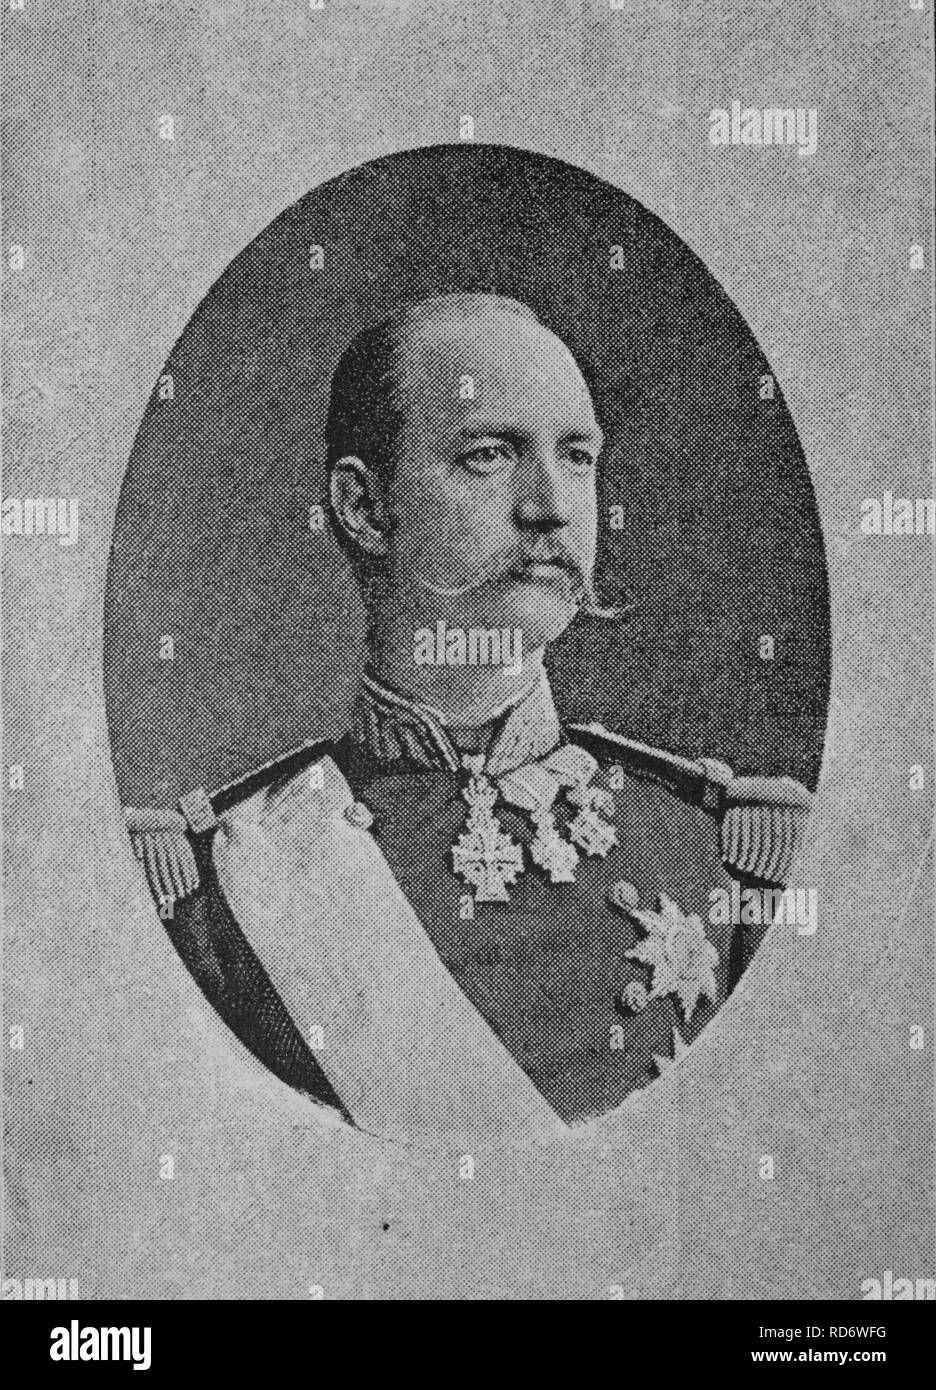 George I, 1845 - 1913, King of Greece, woodcut from 1880 Stock Photo